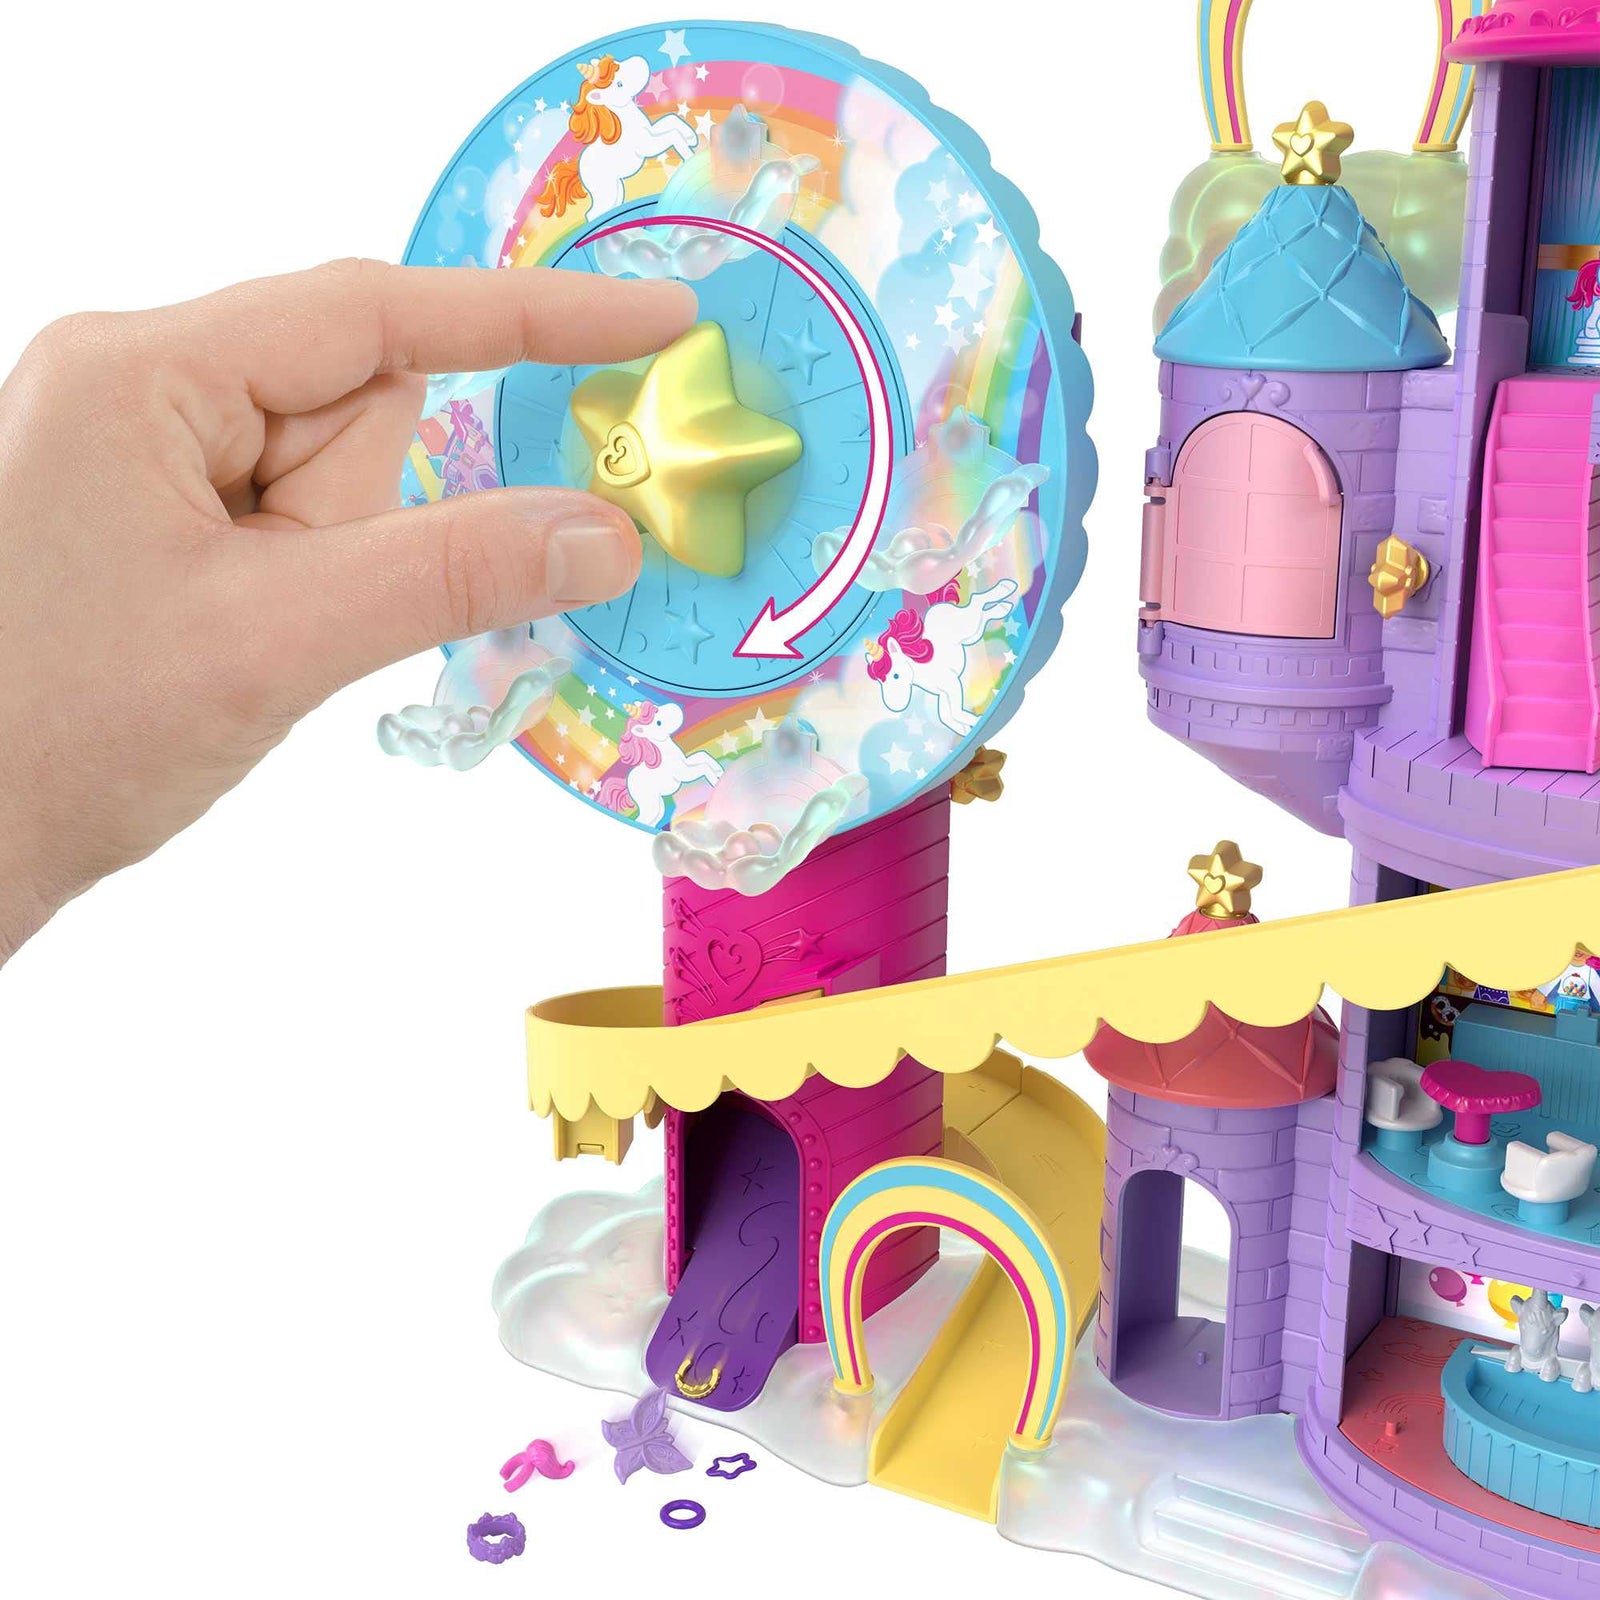 Mattel Polly Pocket Rainbow Funland Theme Park, 3 Rides, 7 Play Areas, Polly and Shani Dolls, 2 Unicorns & 25 Surprise Accessories (30 Total Play Pieces), Dispensing Feature for Surprises